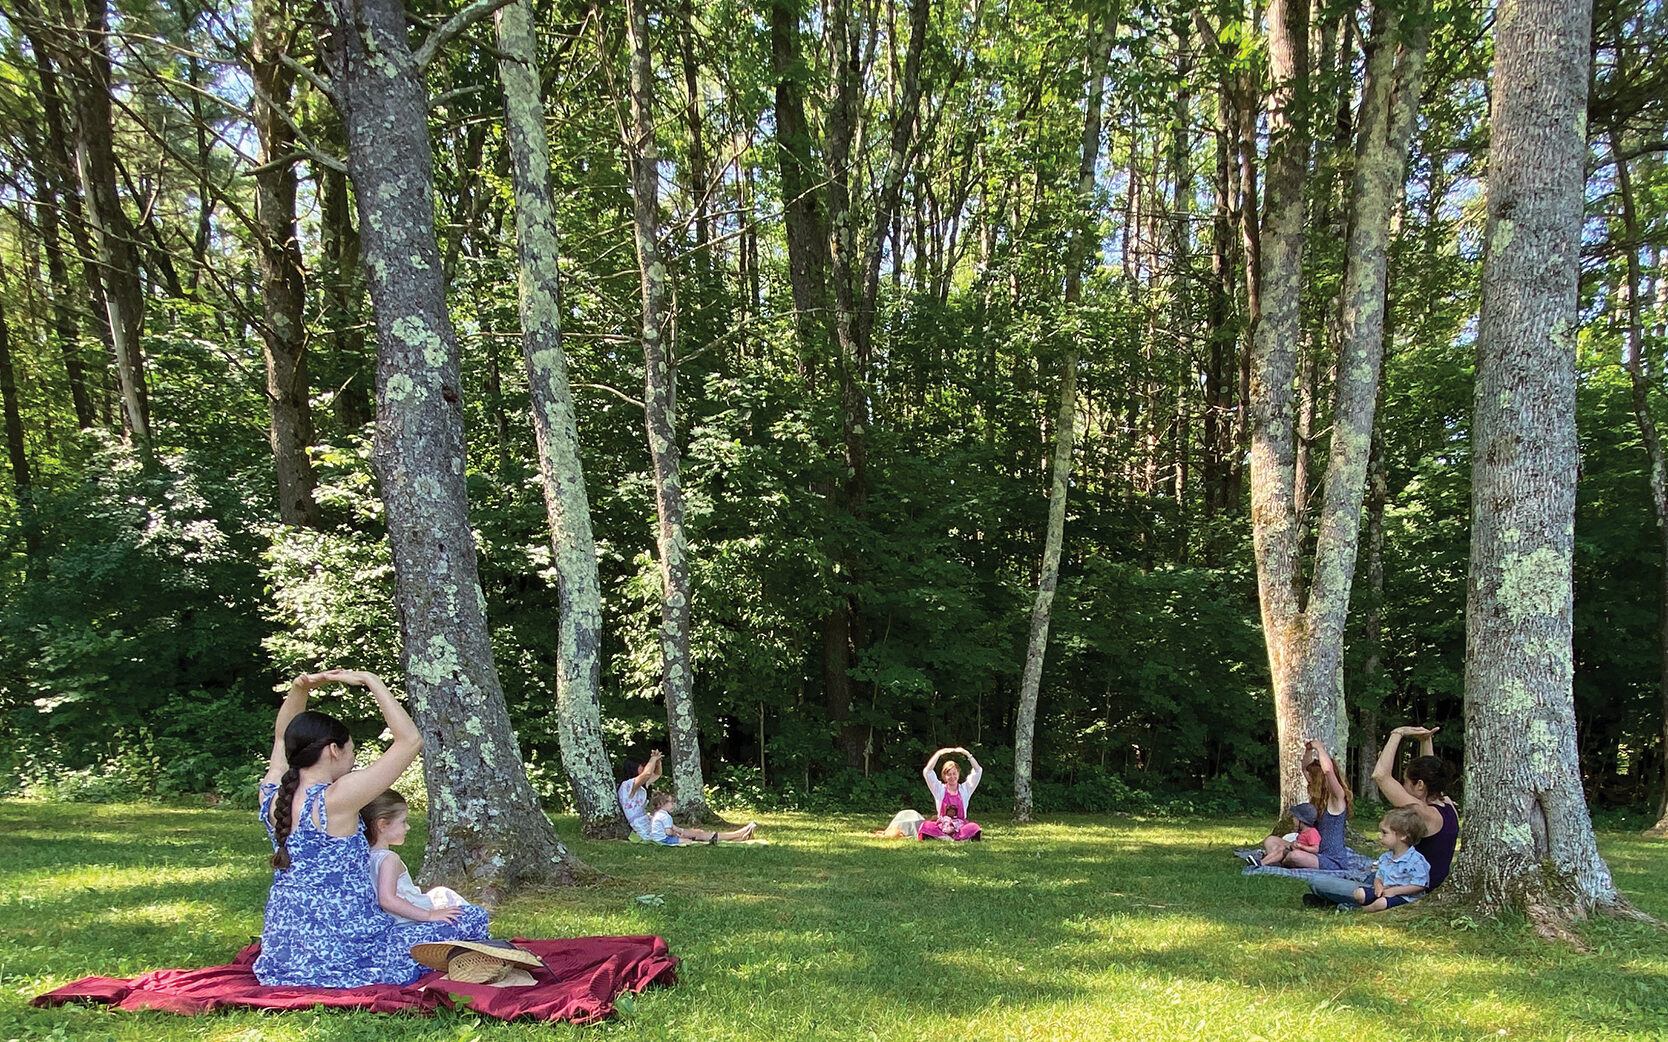 Caregiver and child pairs sit together on a lawn surrounded by tall trees; the grass is a vibrant green and the caregivers have their hands together over their heads